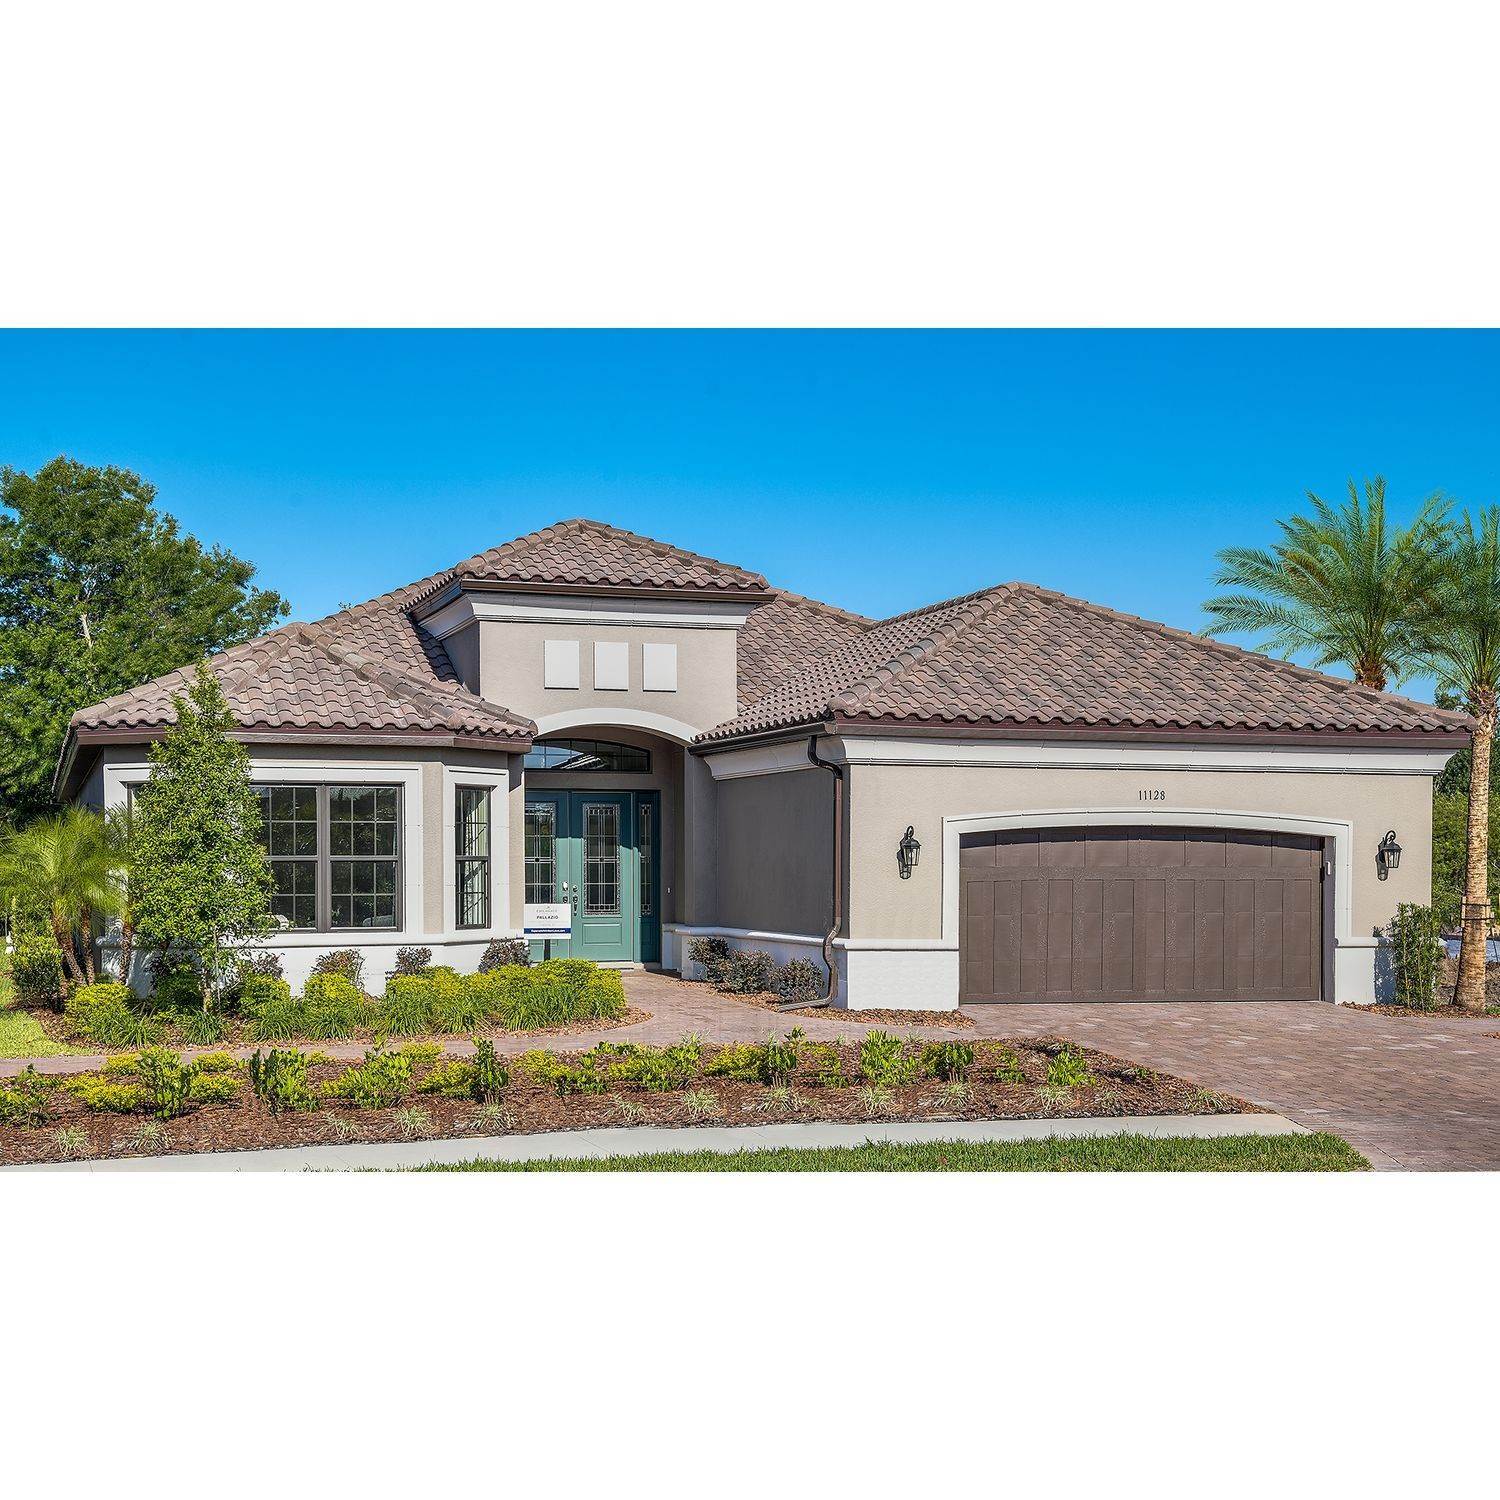 Single Family for Sale at Esplanade At Artisan Lakes 11140 Wicker Park Place, Palmetto, FL 34221